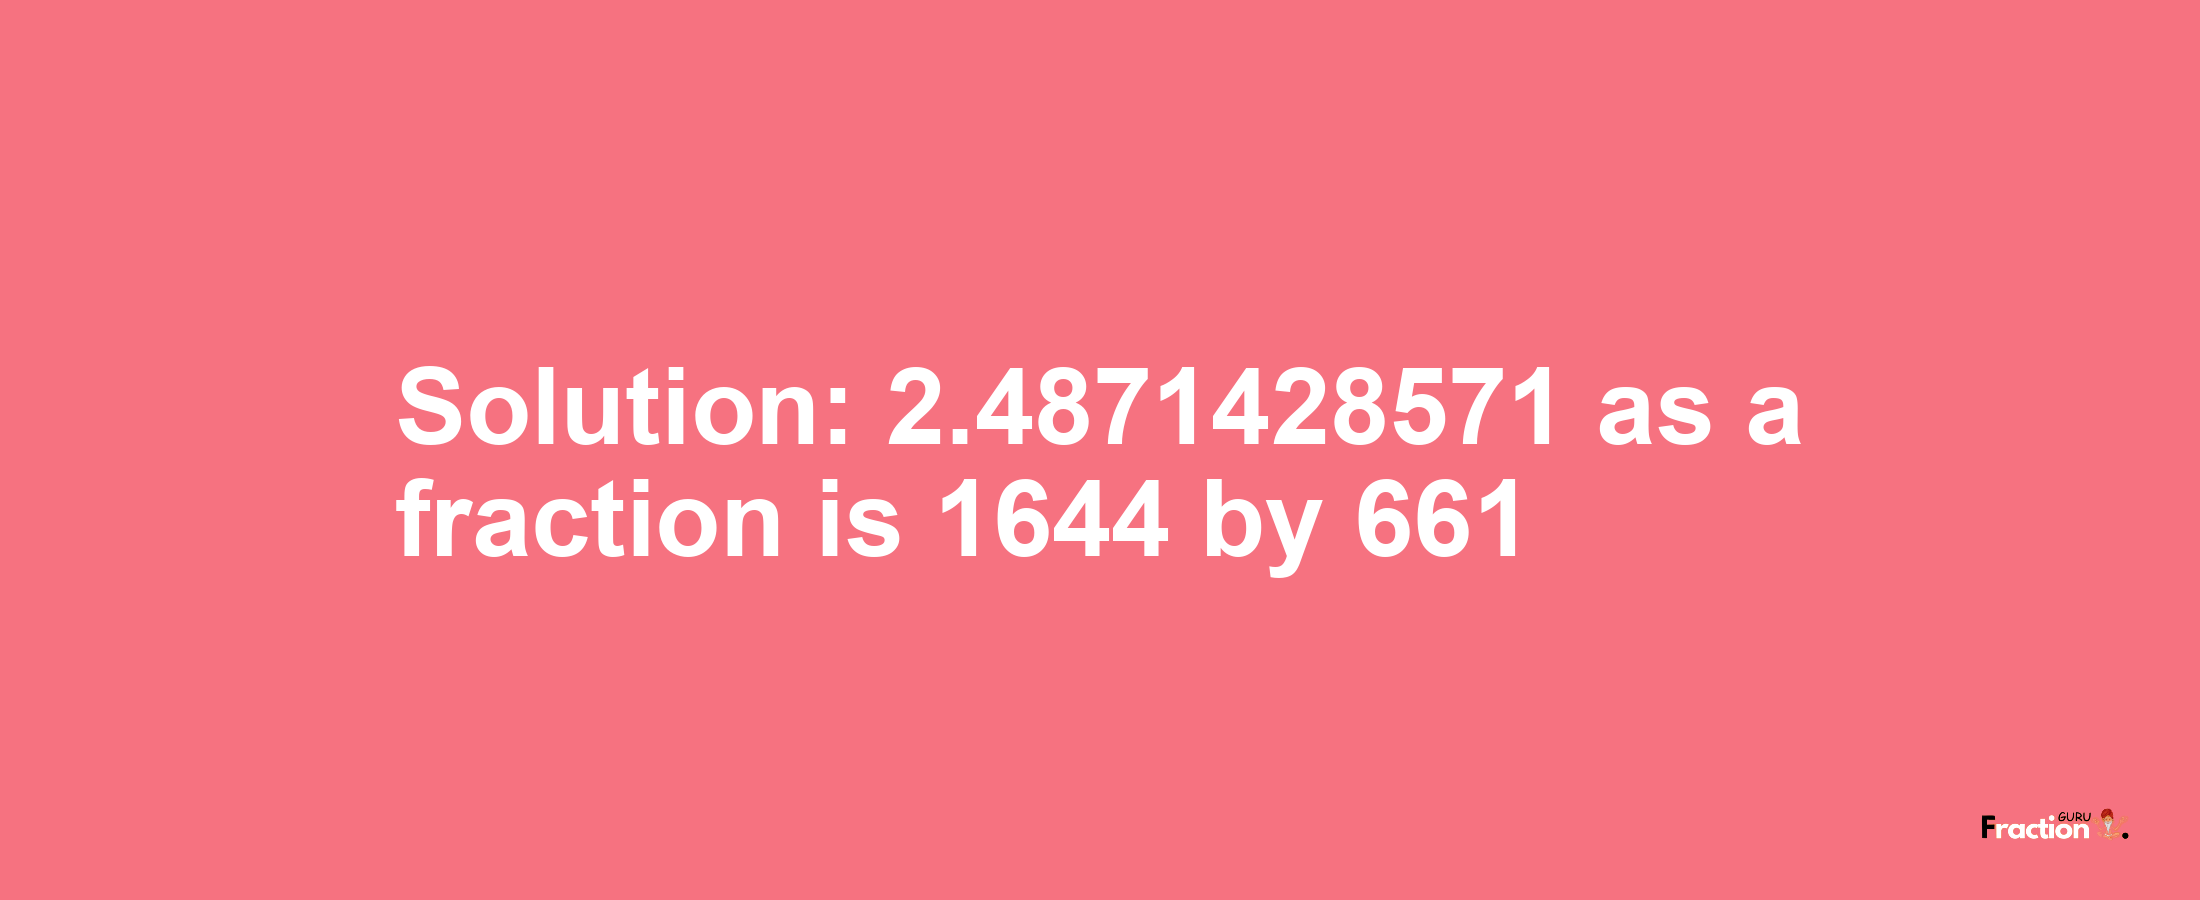 Solution:2.4871428571 as a fraction is 1644/661